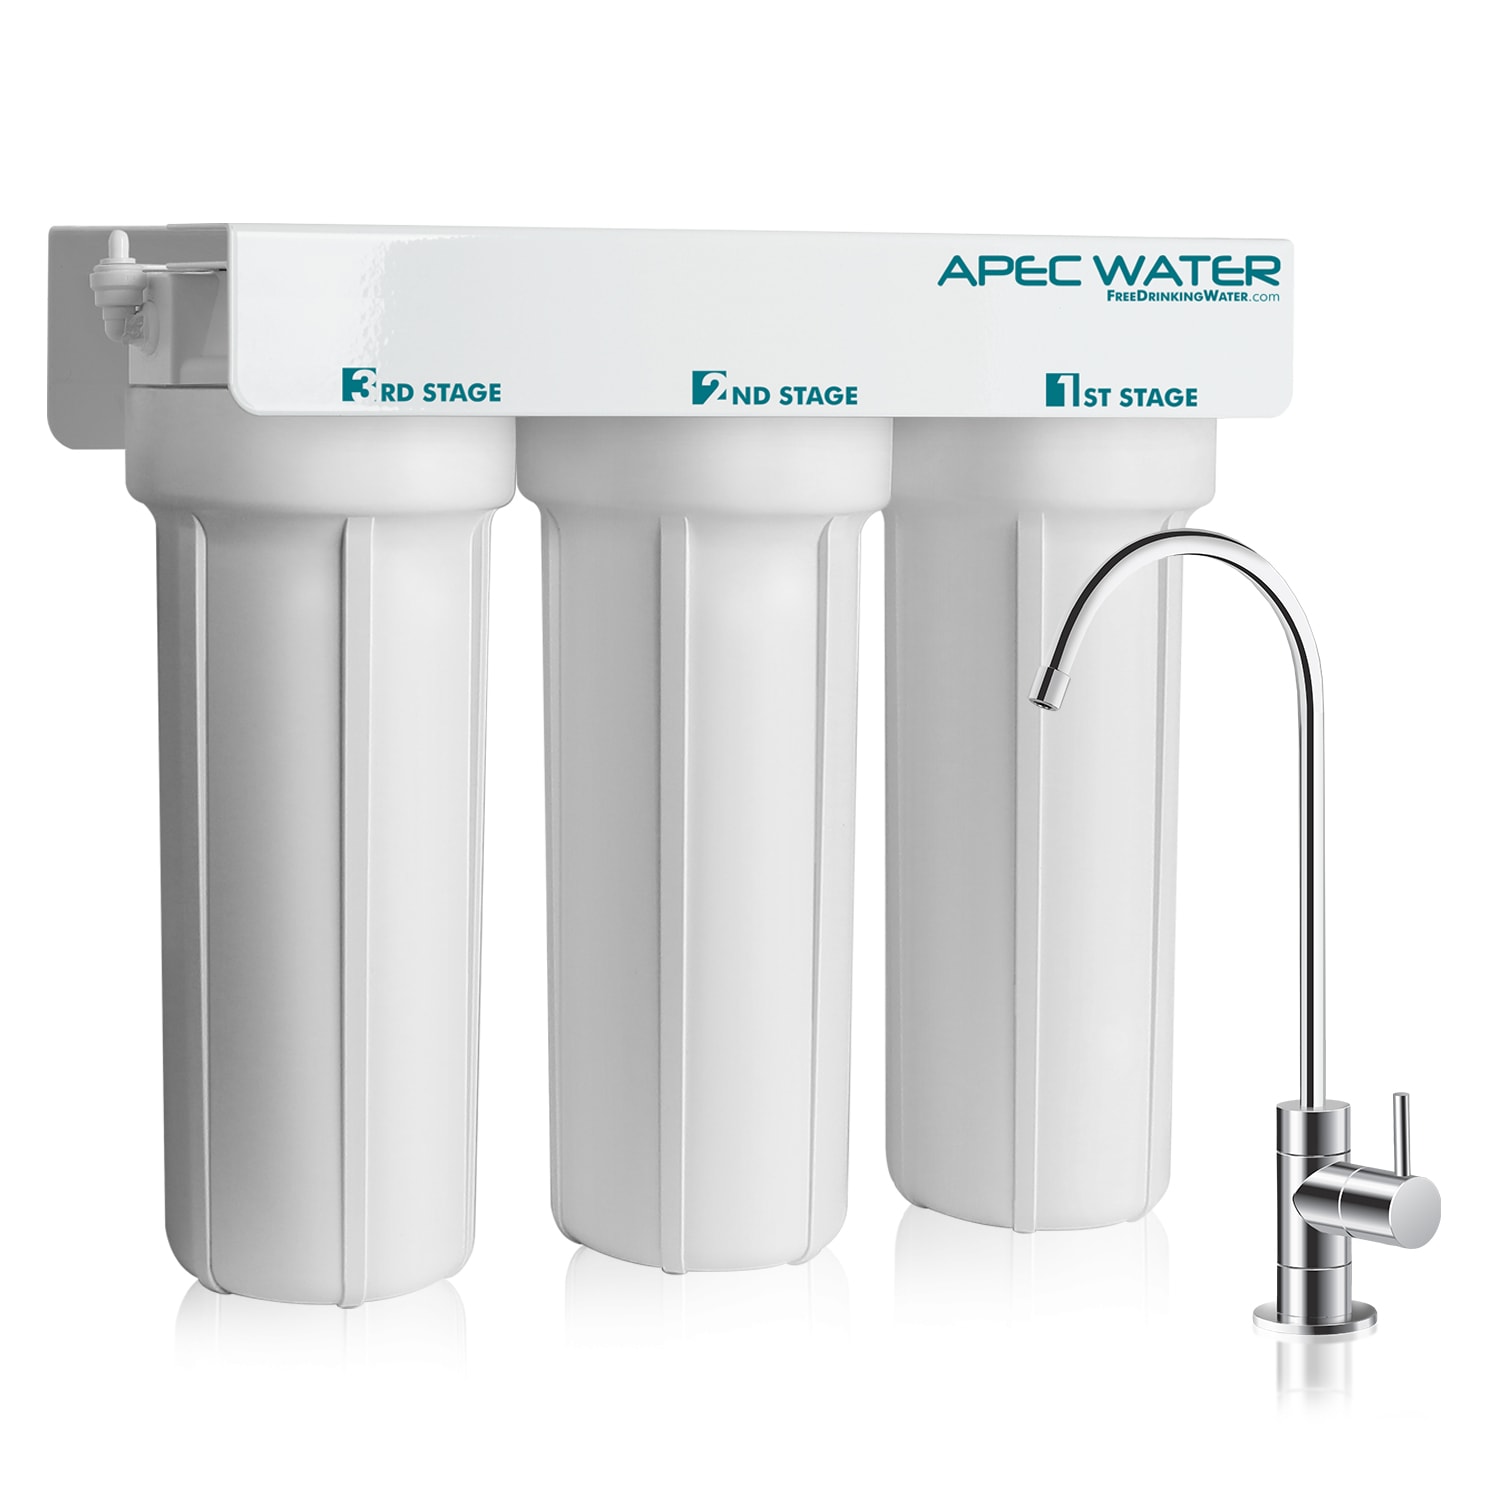 Under-Sink Water Filters: Are They a Good Investment?